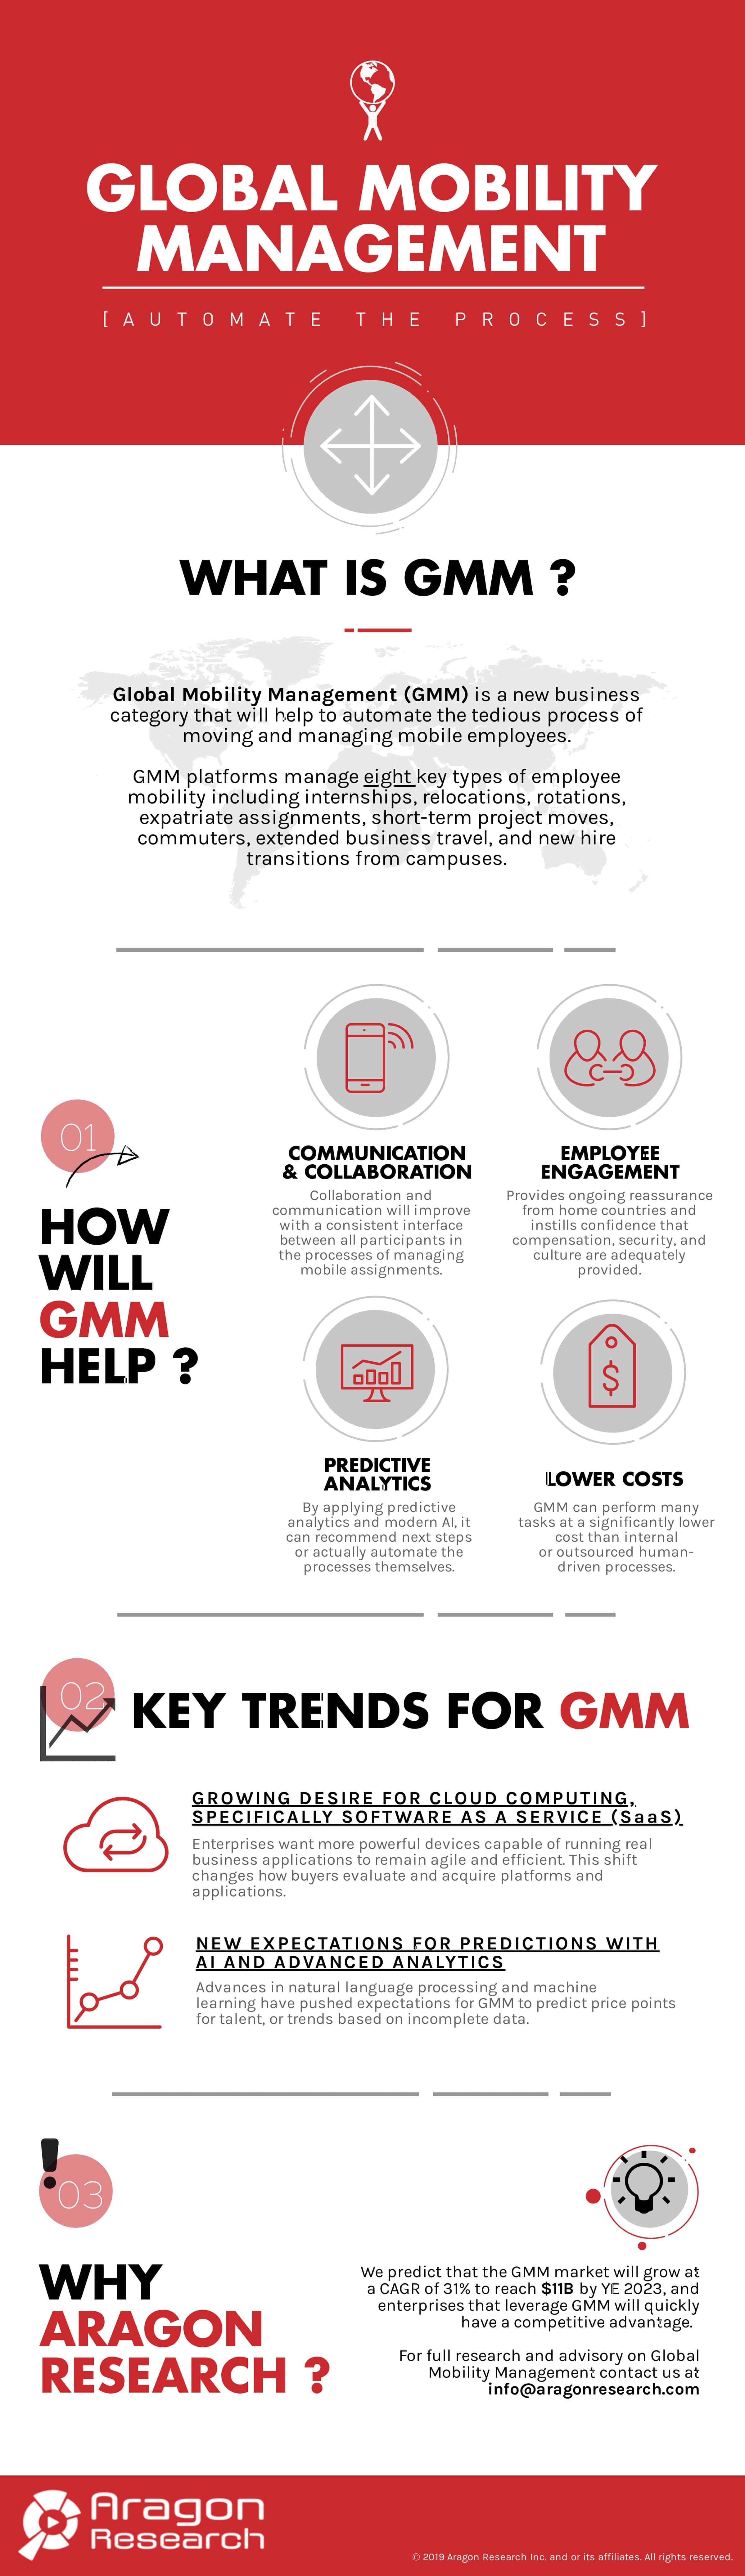 Global Mobility Management introductory infographic